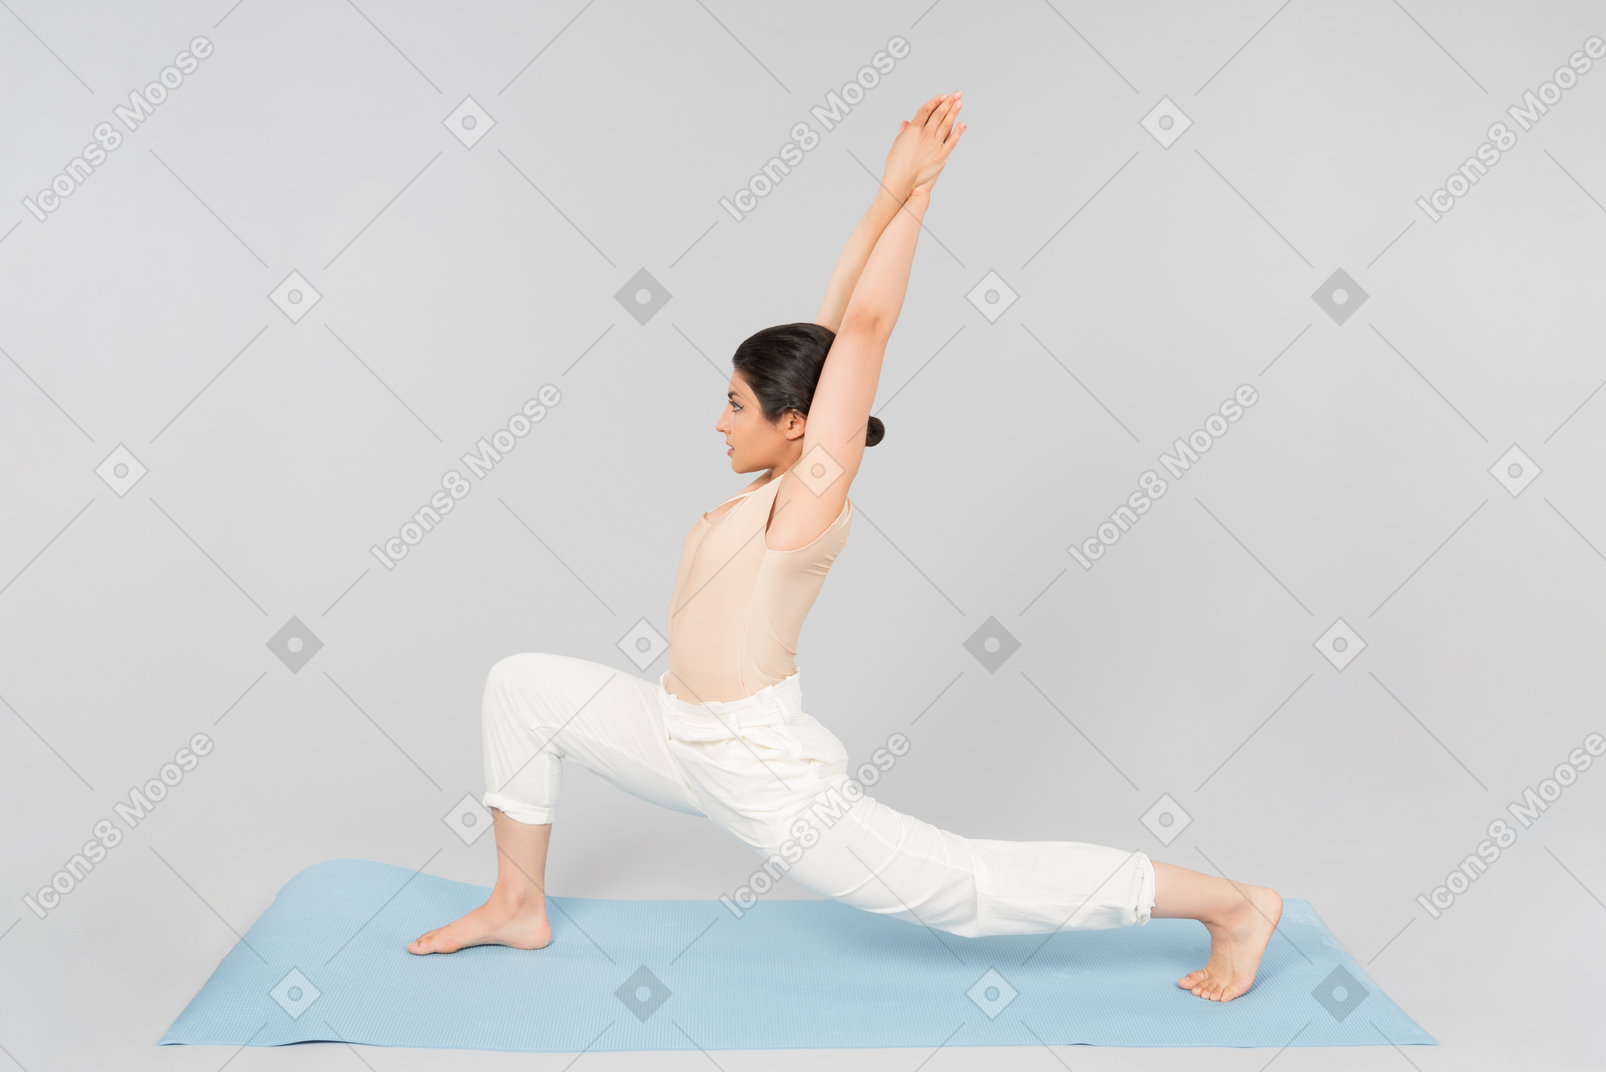 Young indian woman stretching herlself while standing on yoga mat